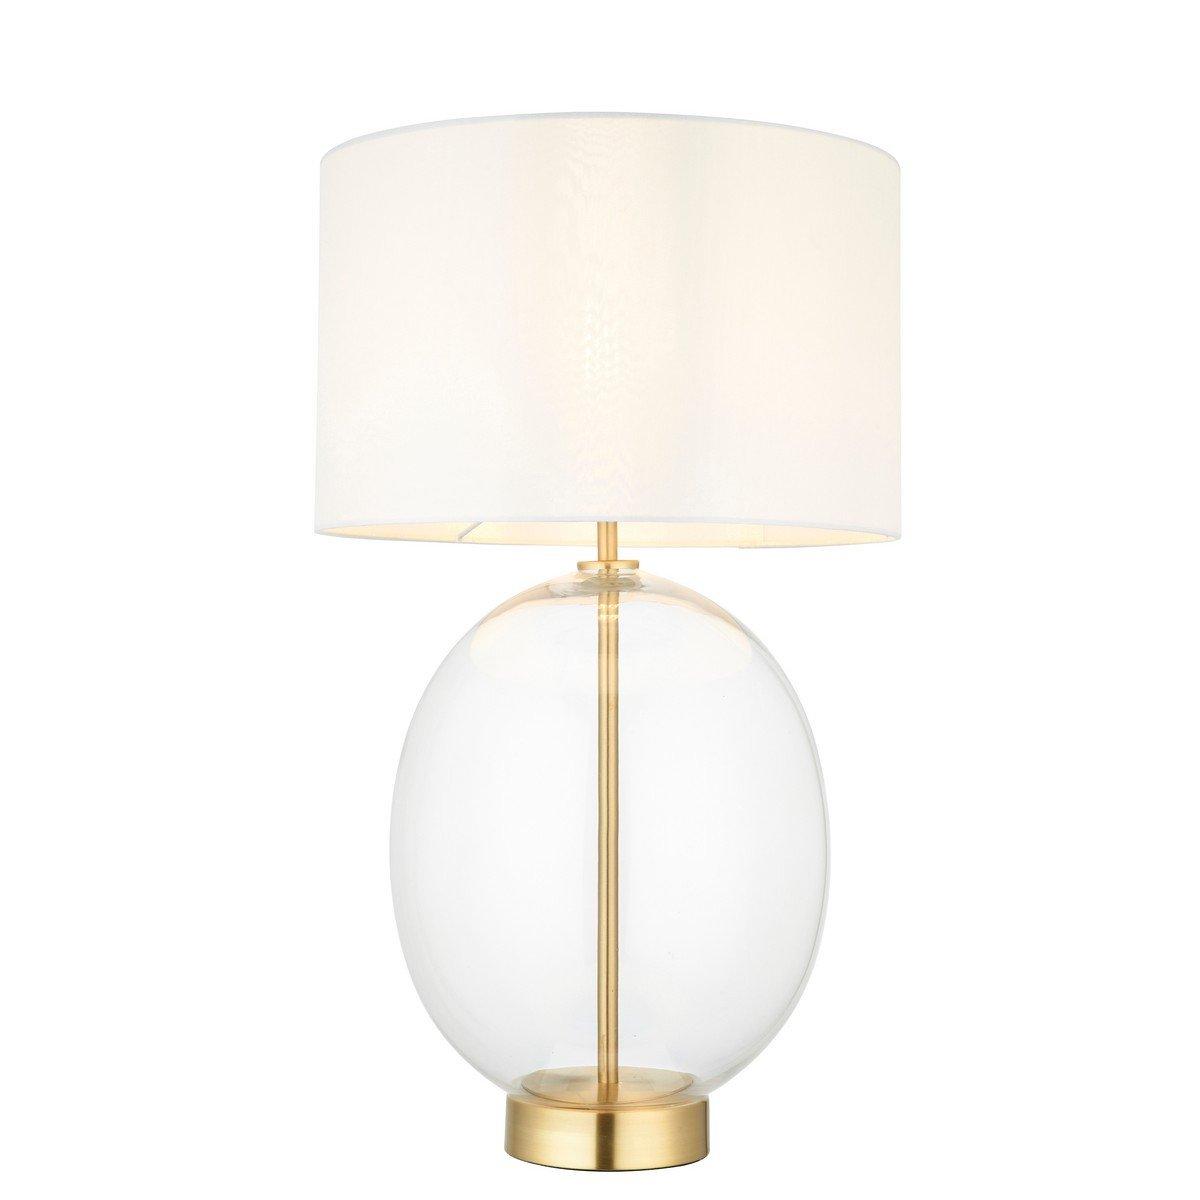 Lecce Complete Table Lamp Satin Brass Plate Glass With Vintage White Fabric